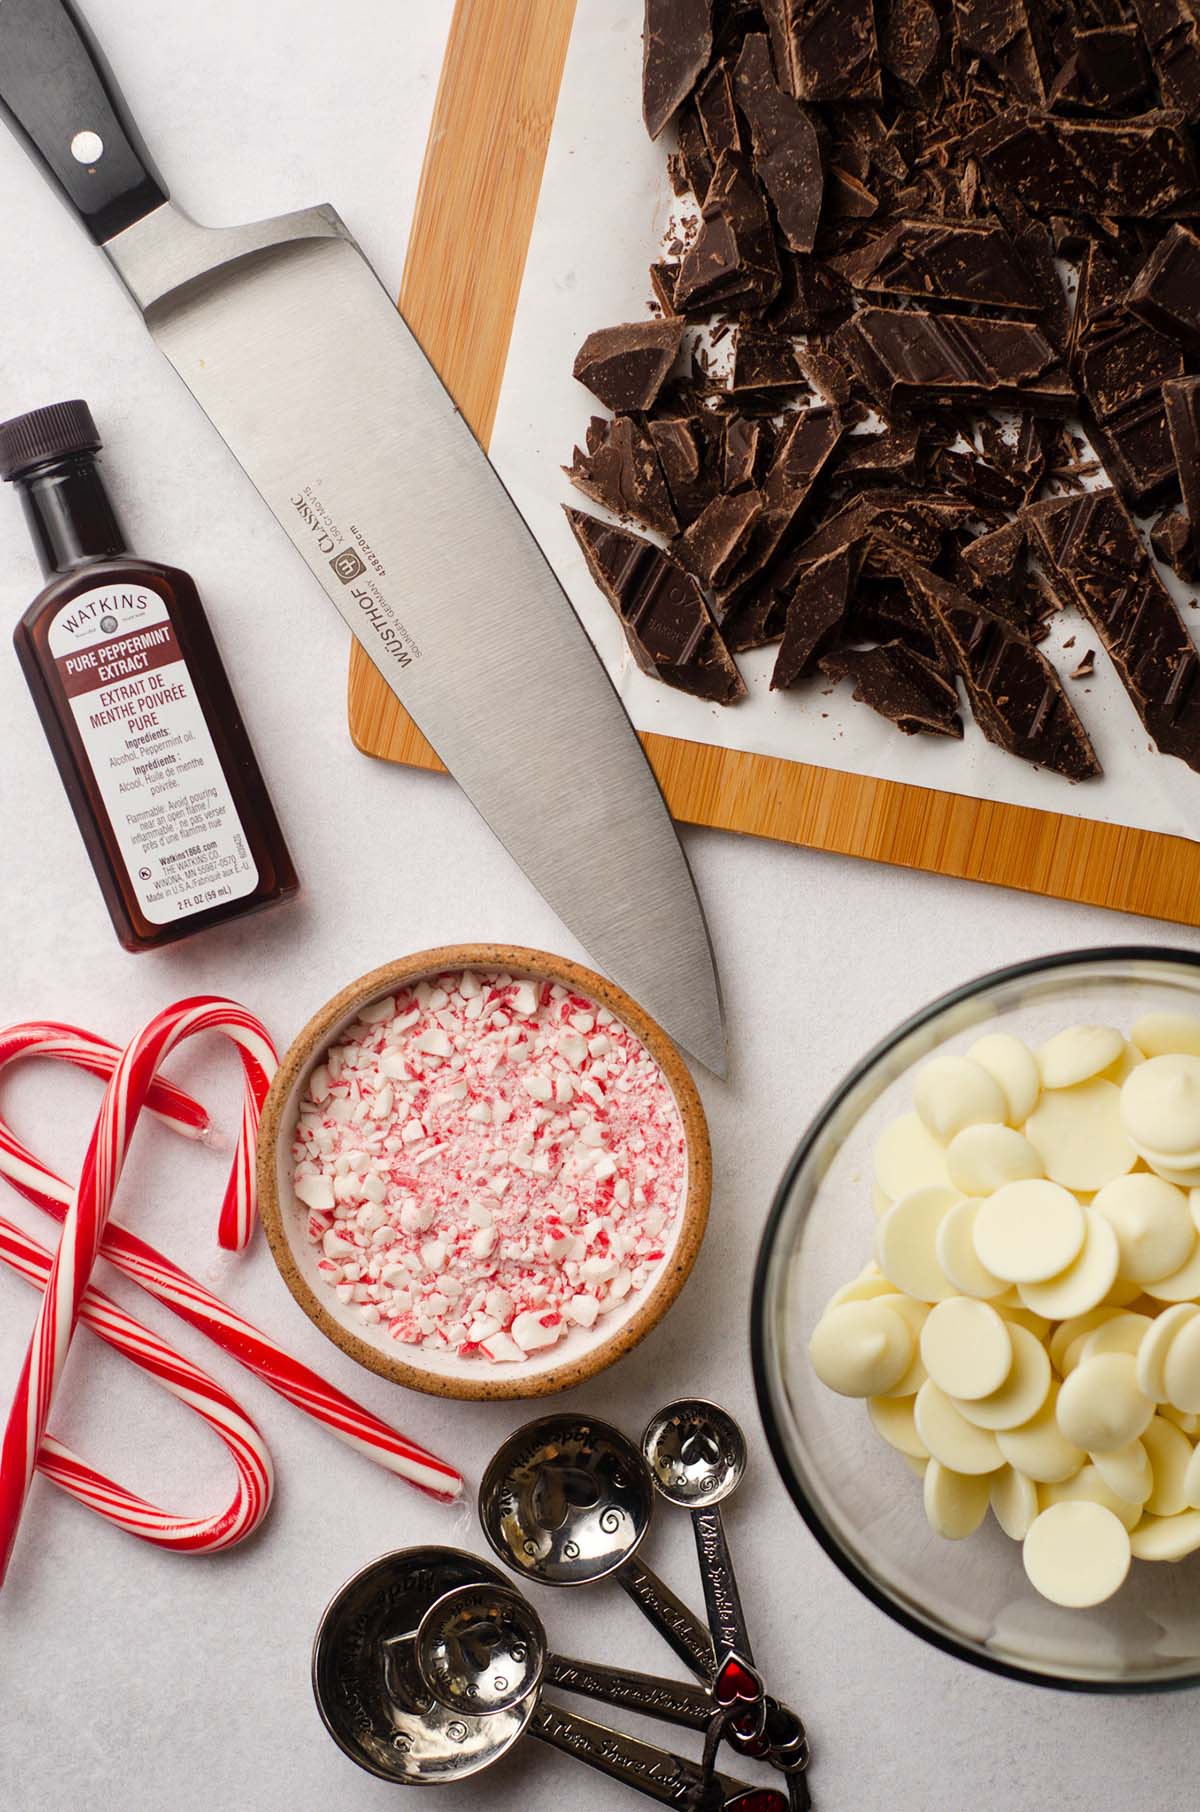 ingredients needed to make homemade peppermint bark